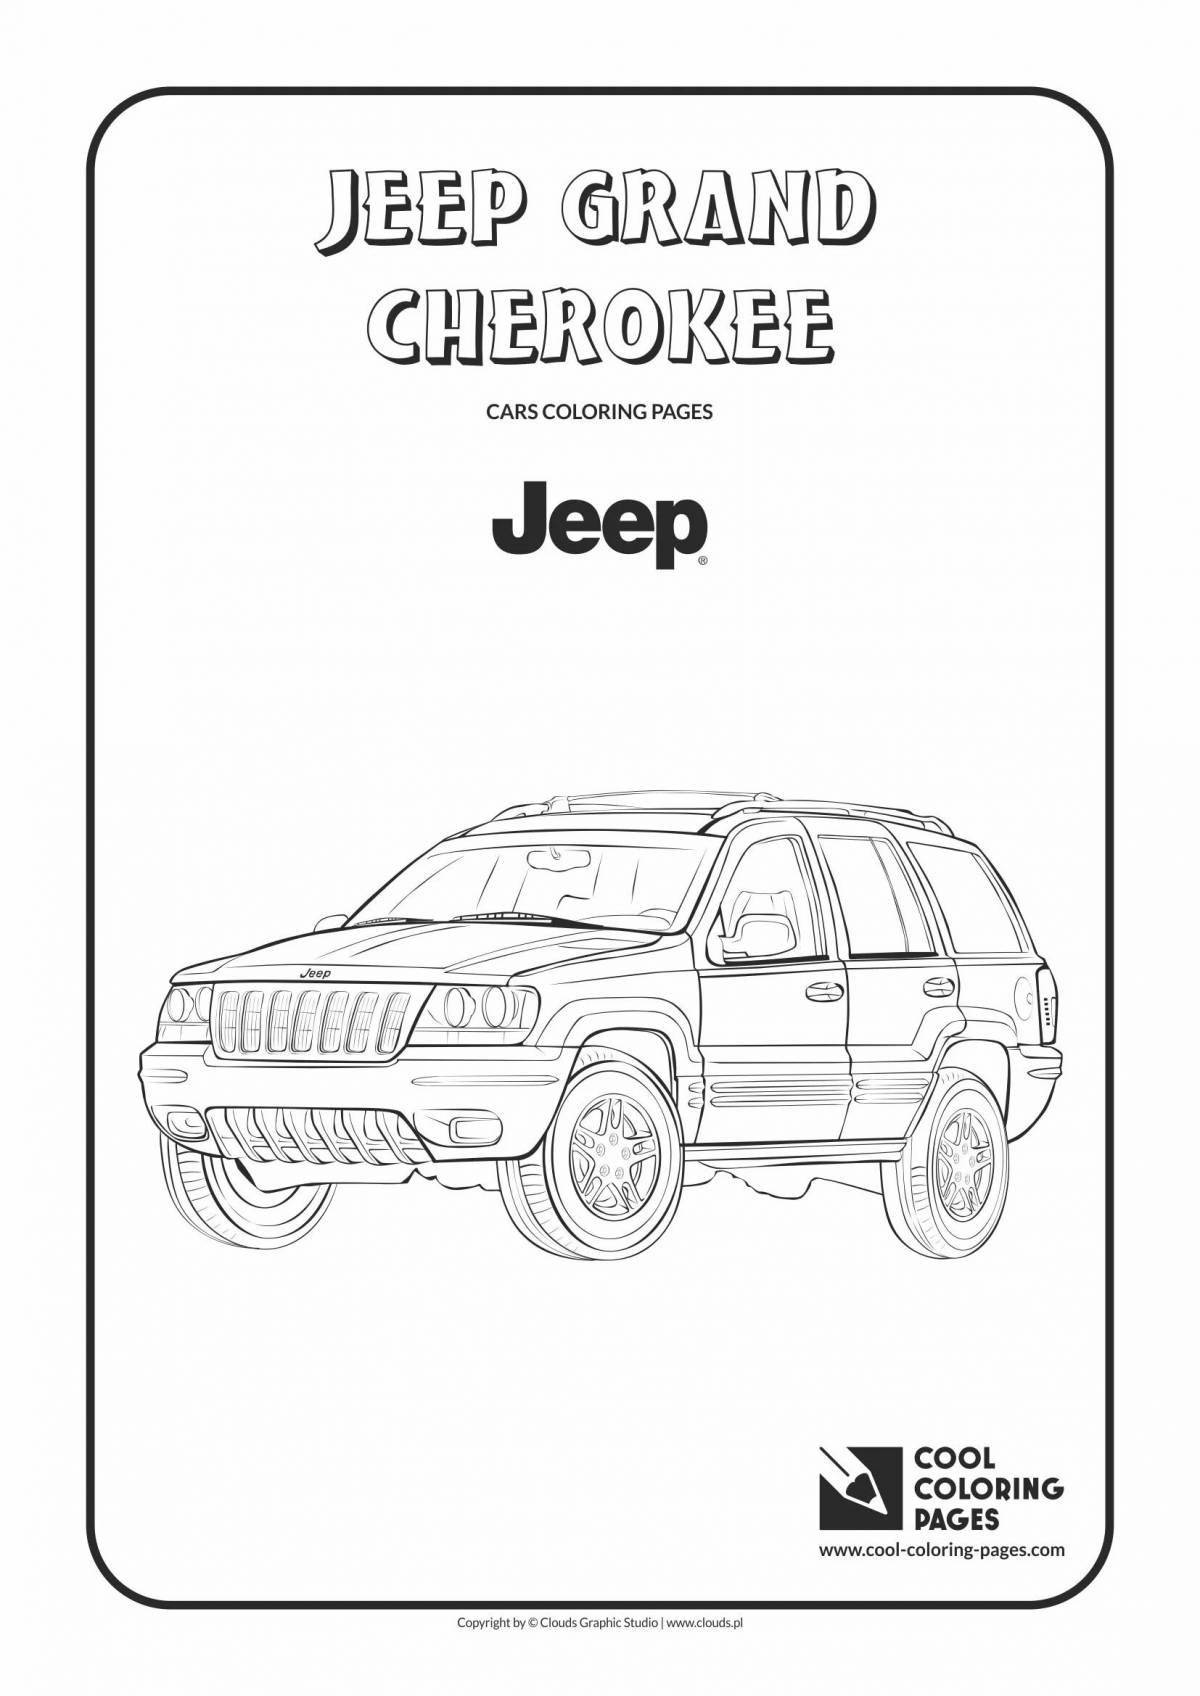 Luxury grand cherokee coloring page